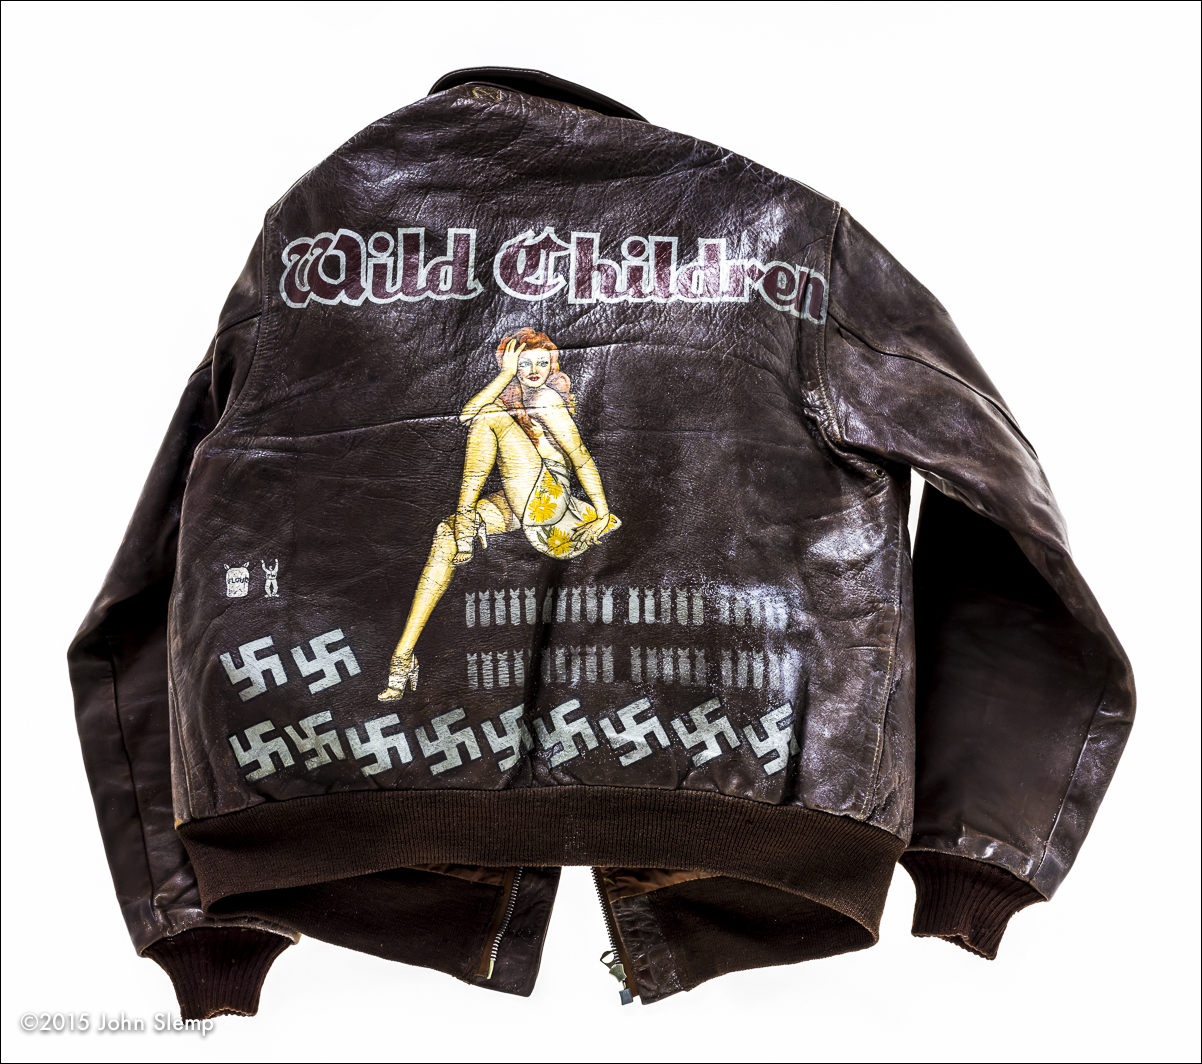 Donated by Robert W. Waltz, this jacket is from the collection at the Smithsonian Air & Space Museum.  Note the PW and flour bag emblems.  The aircraft/crew participated in a food airlift in the spring of 1945 to the starving Dutch, and repatriated allied POW's immediately after the war ended.